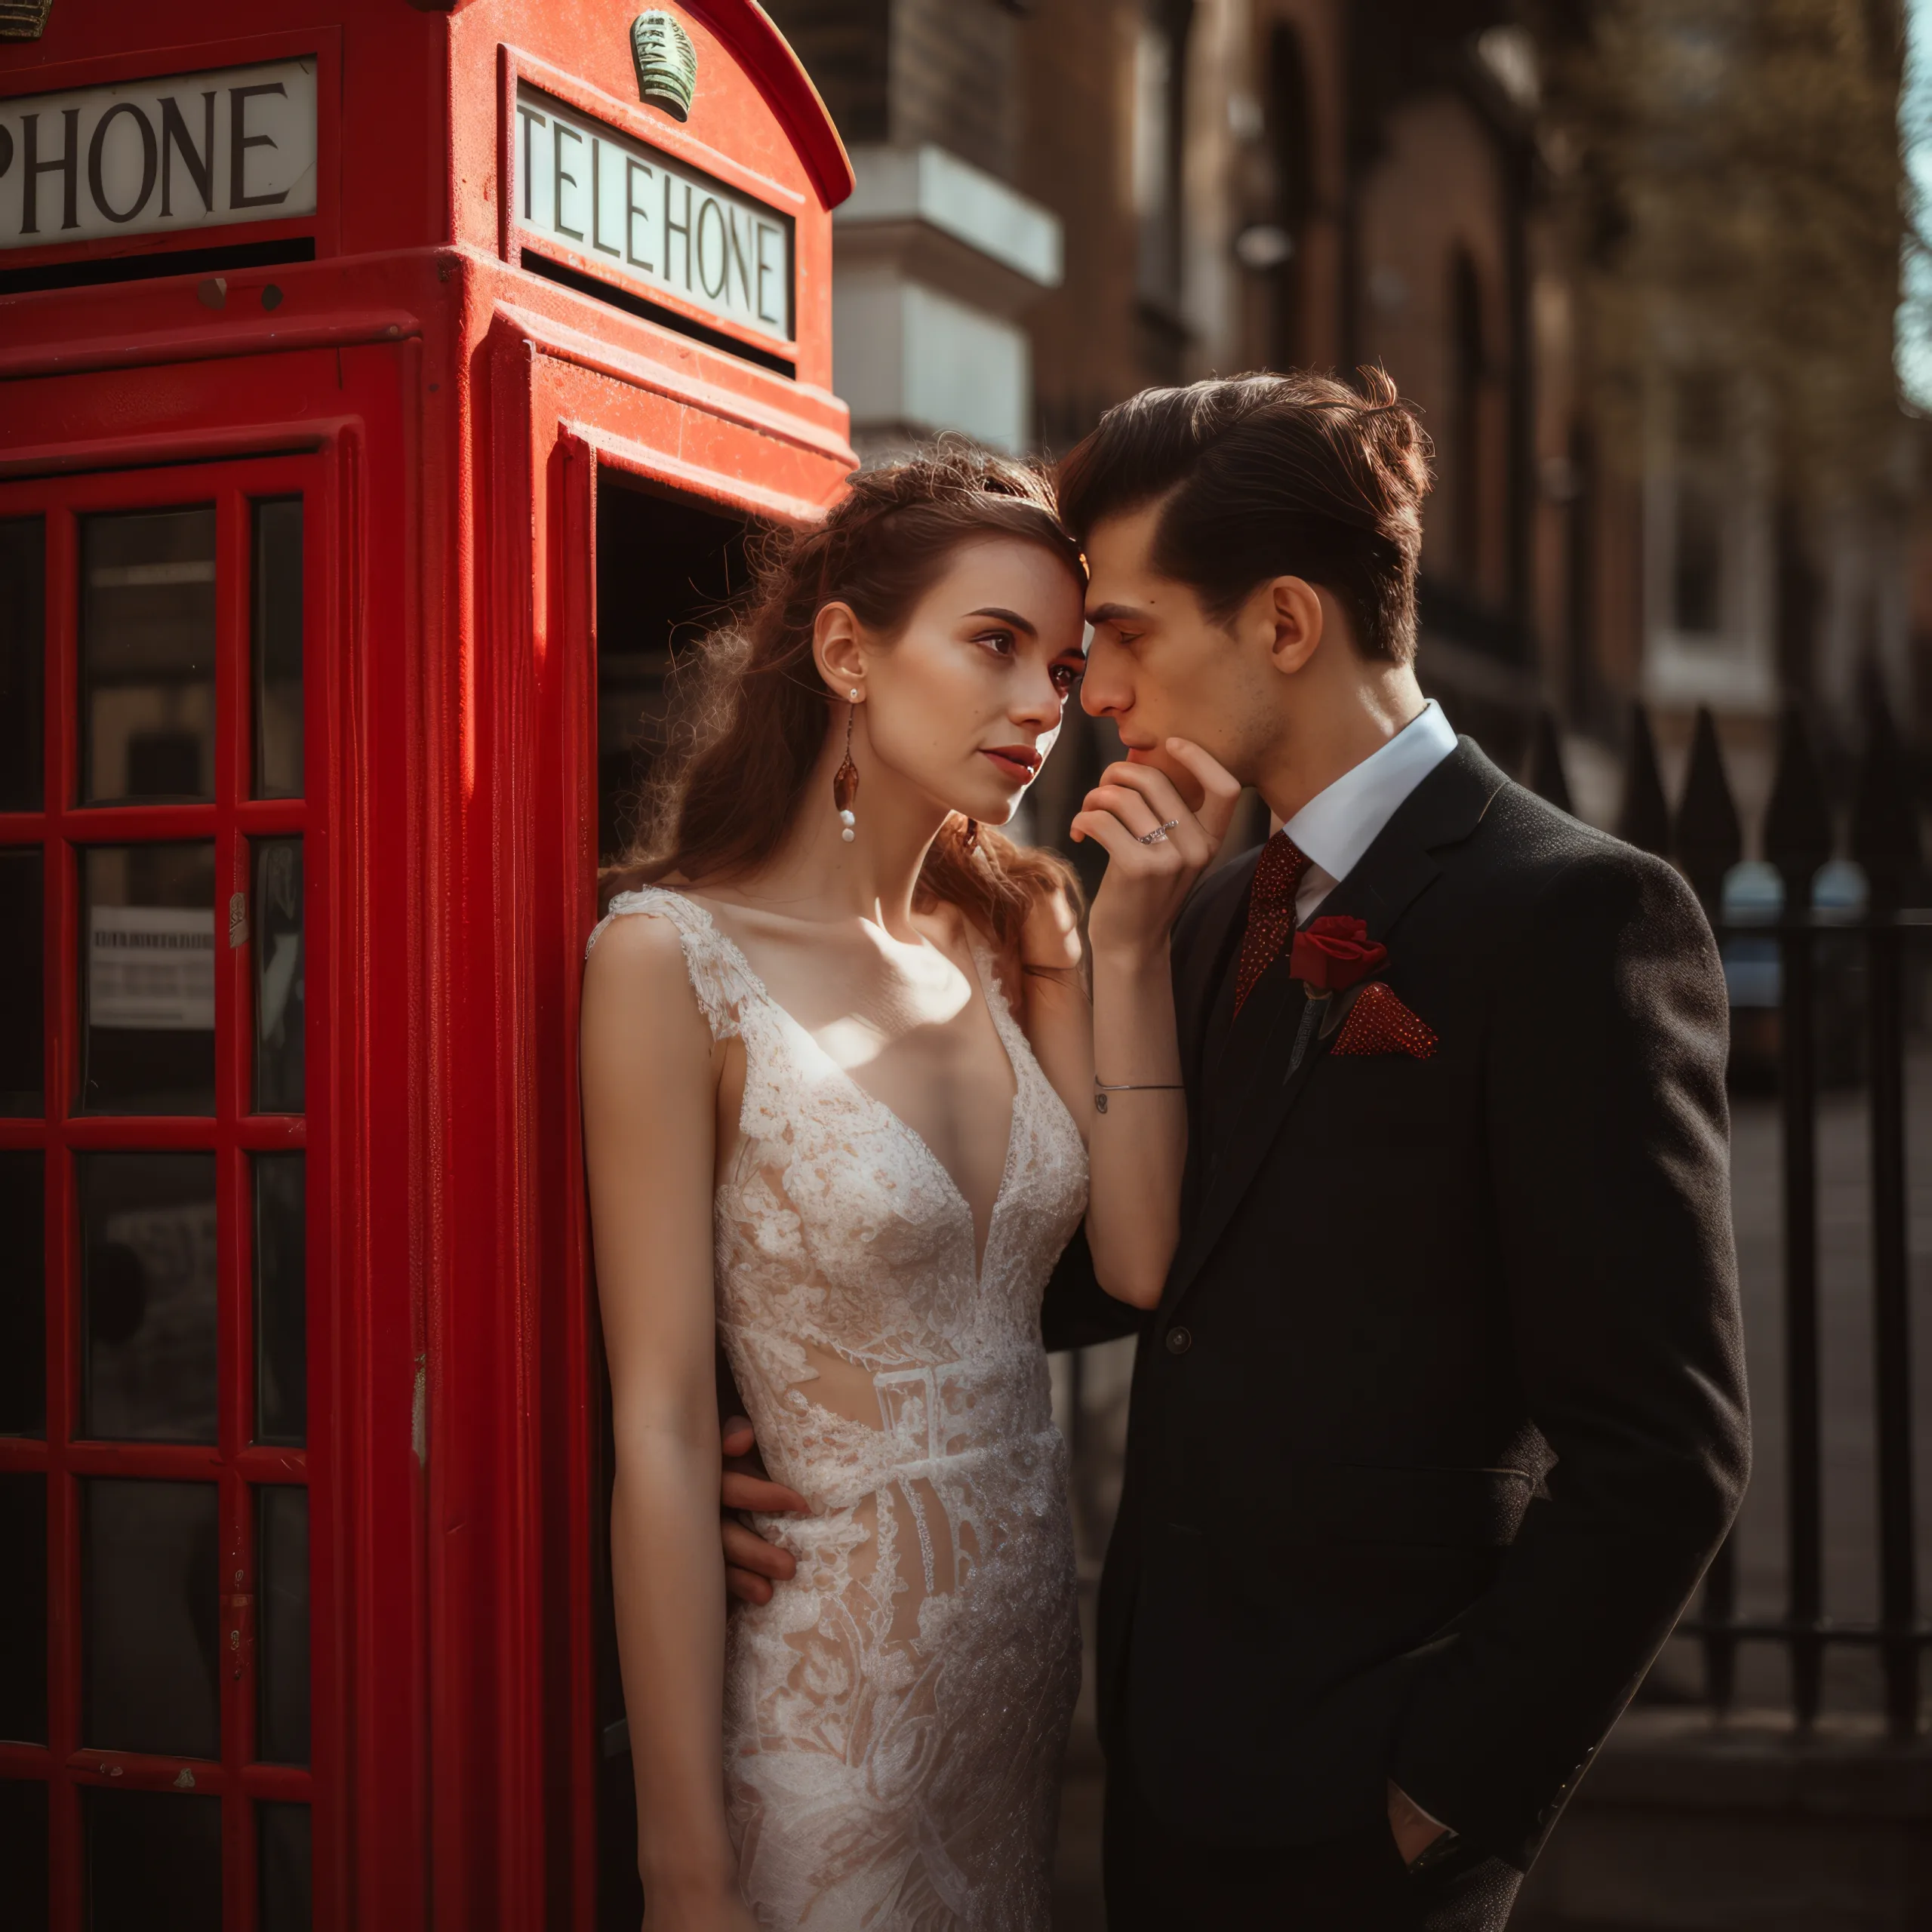 History of Weddings:a man and a woman standing next to a red phone booth.